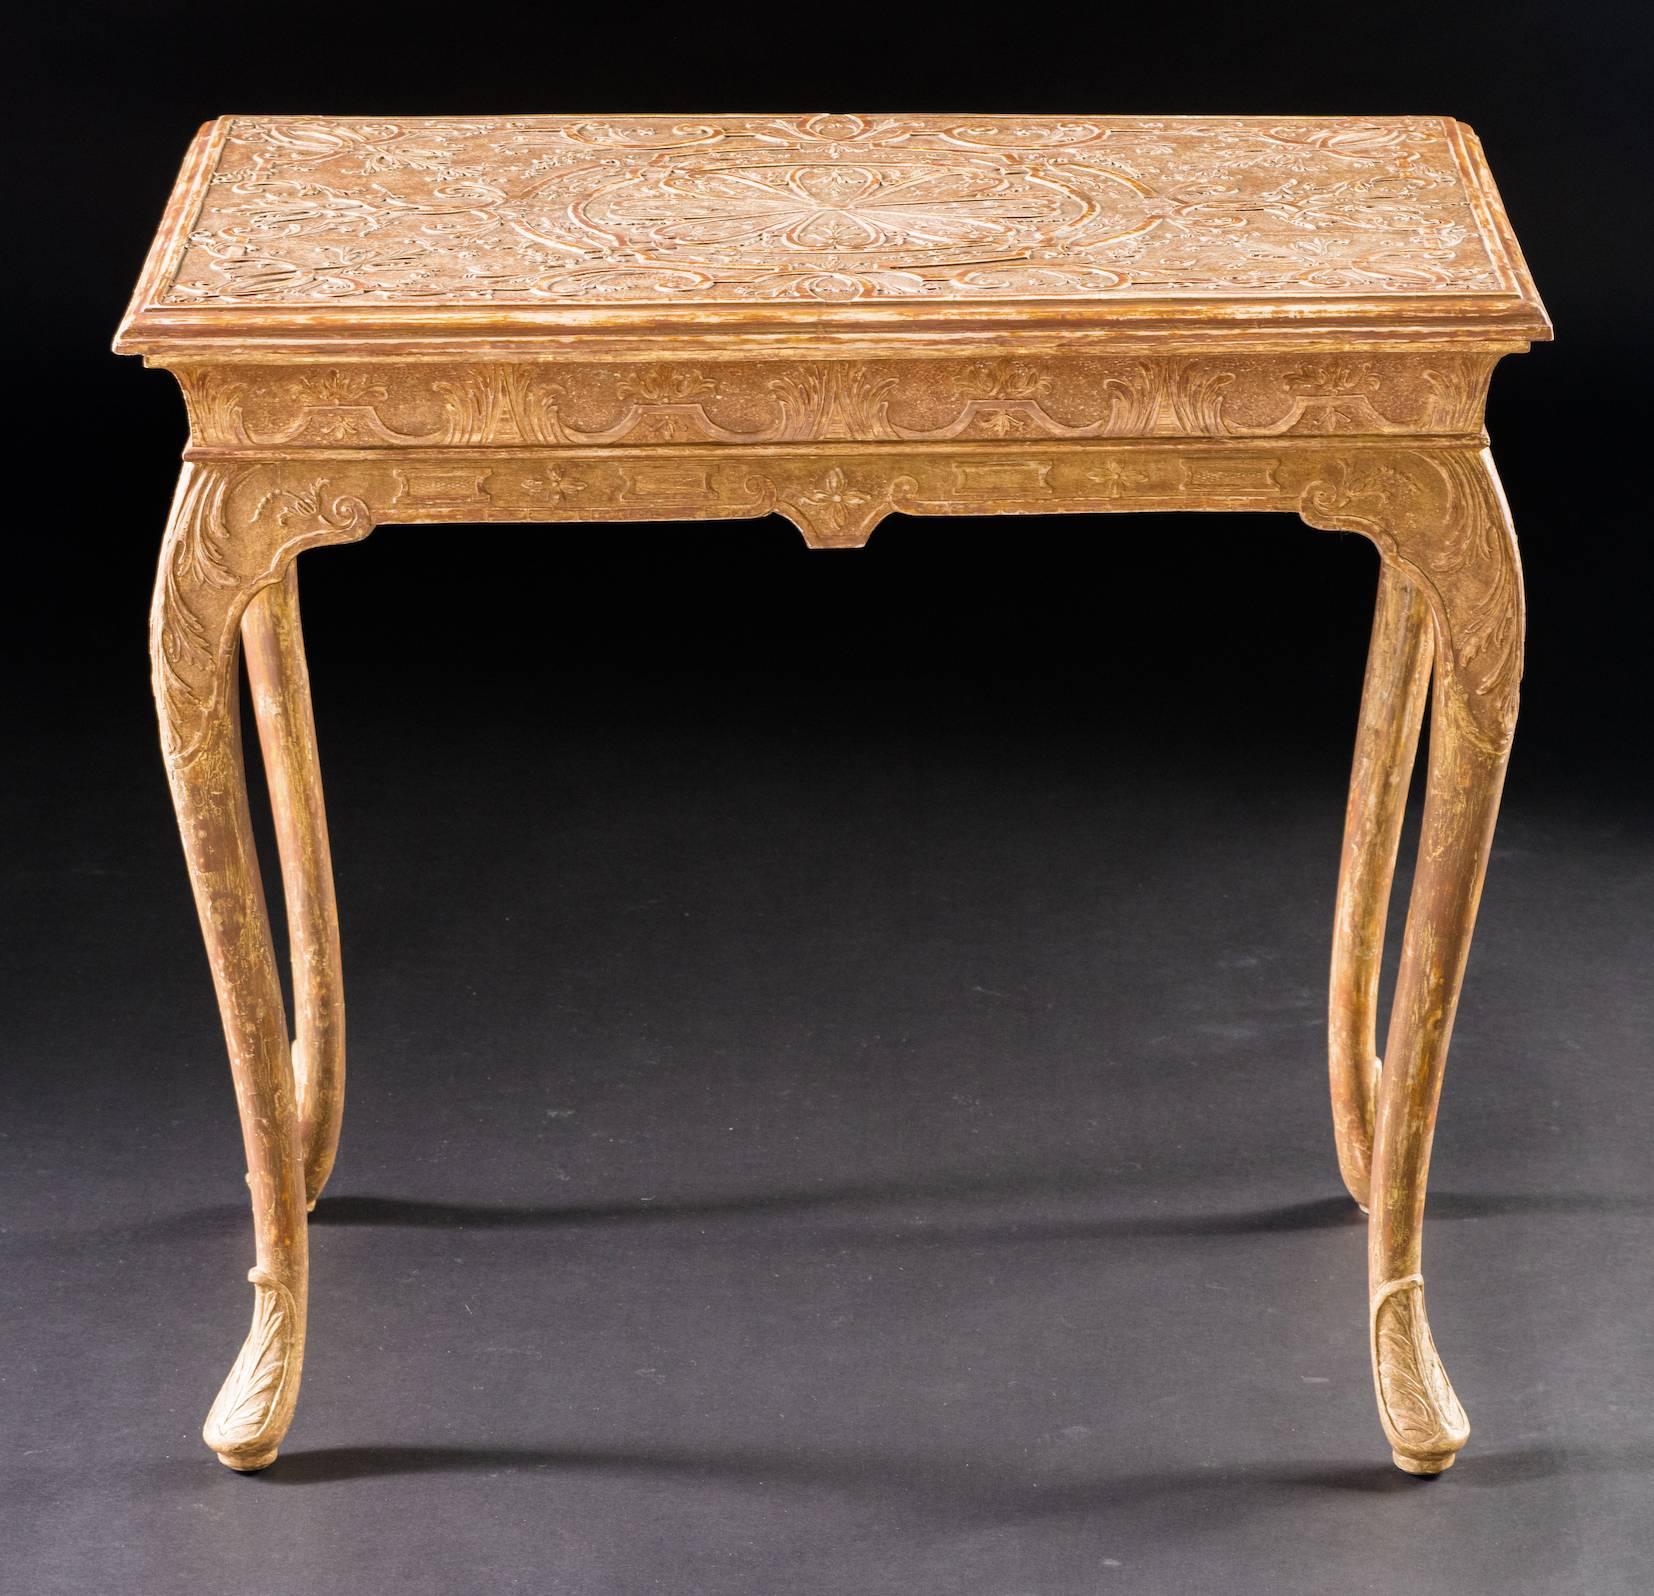 The molded rectangular top with a carved stylized central floral roundel incorporating finely carved bellflower swags, set within foliate strap-work, on punched ground; the shaped apron having conforming decoration, raised on cabriole legs ending in